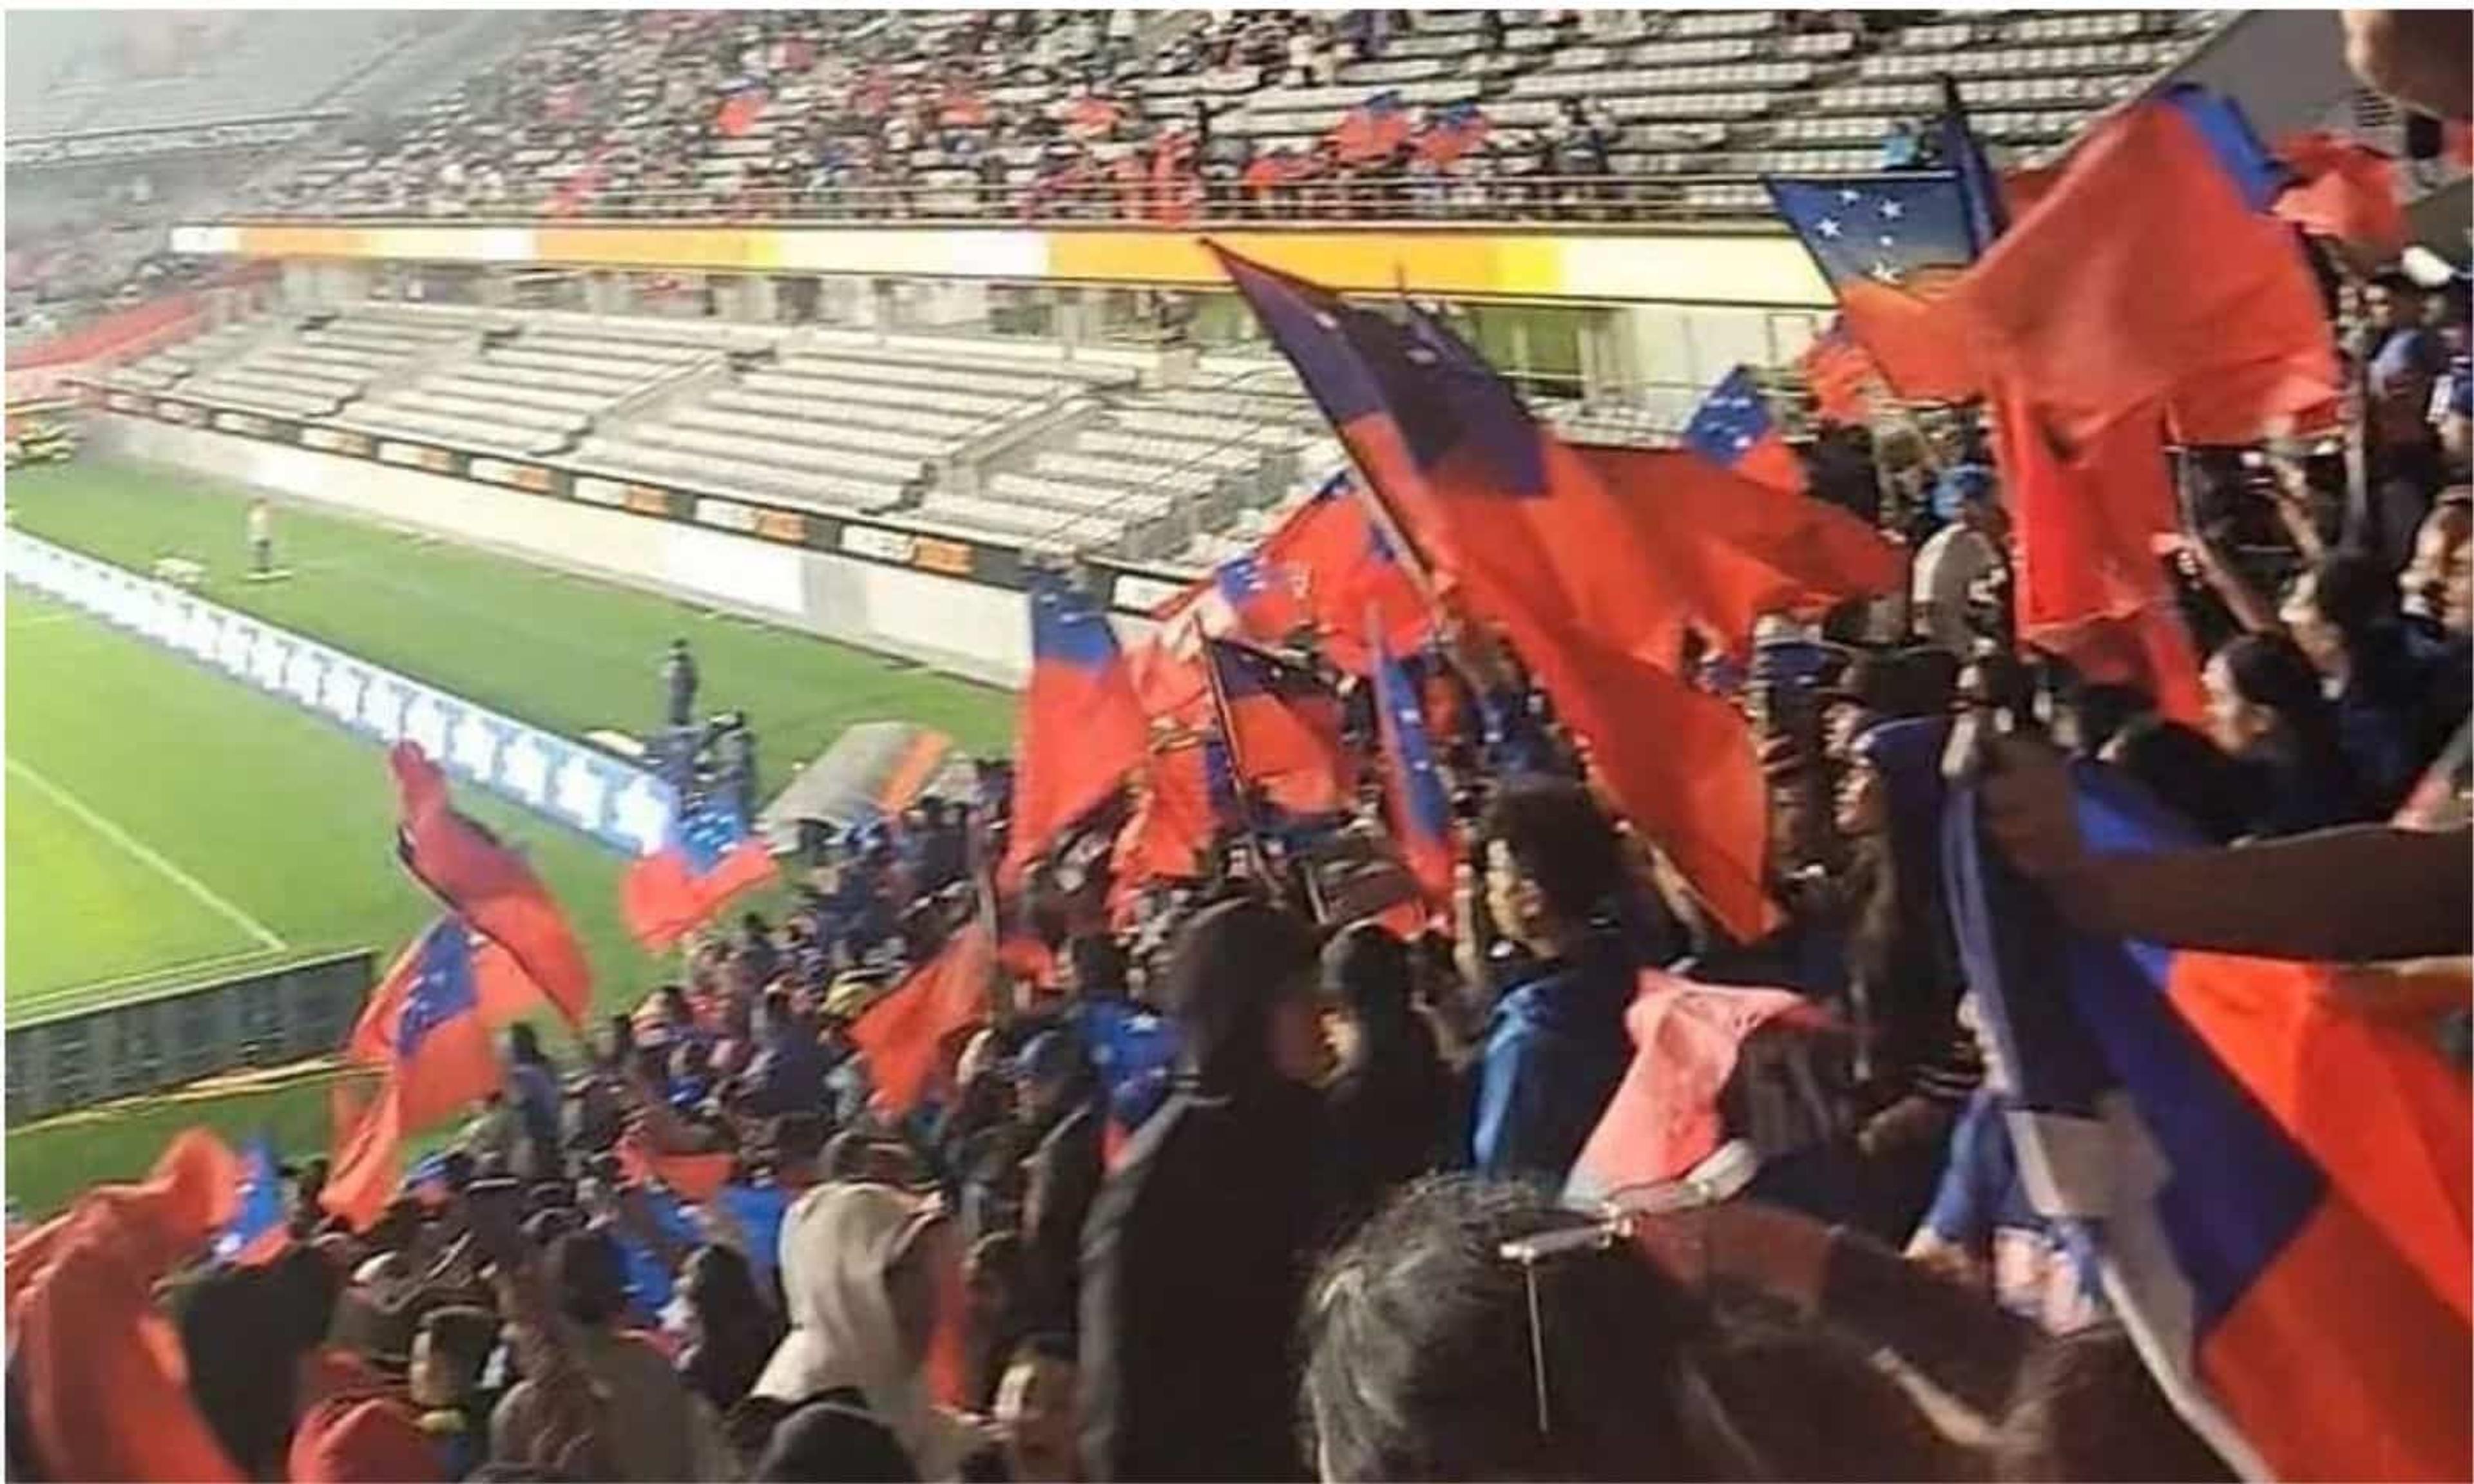 Samoan fans turned out in droves at Eden Park to support their team. 